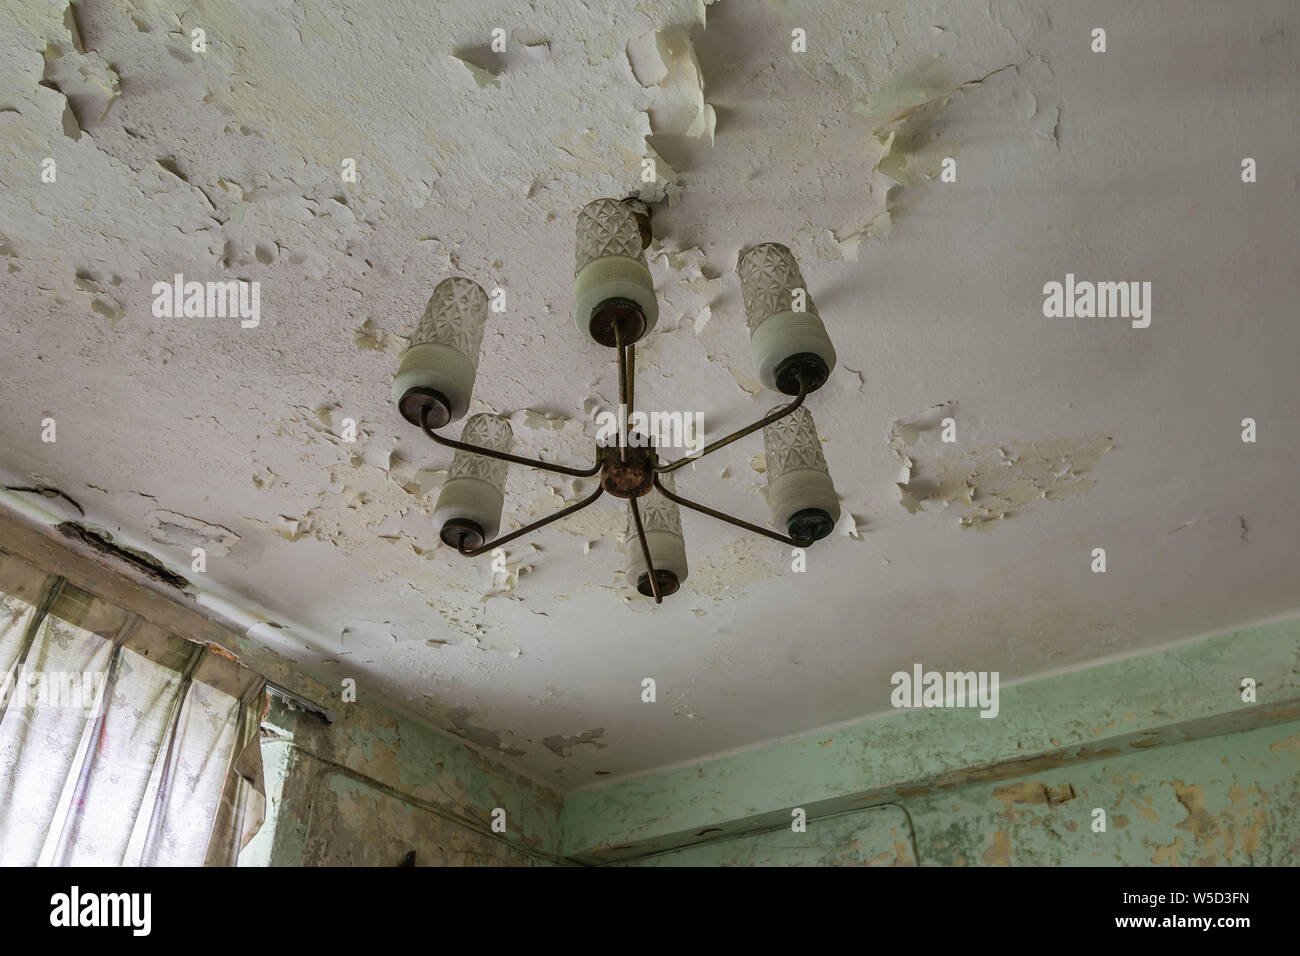 A chandelier in the ceiling of the abandoned house Stock Photo